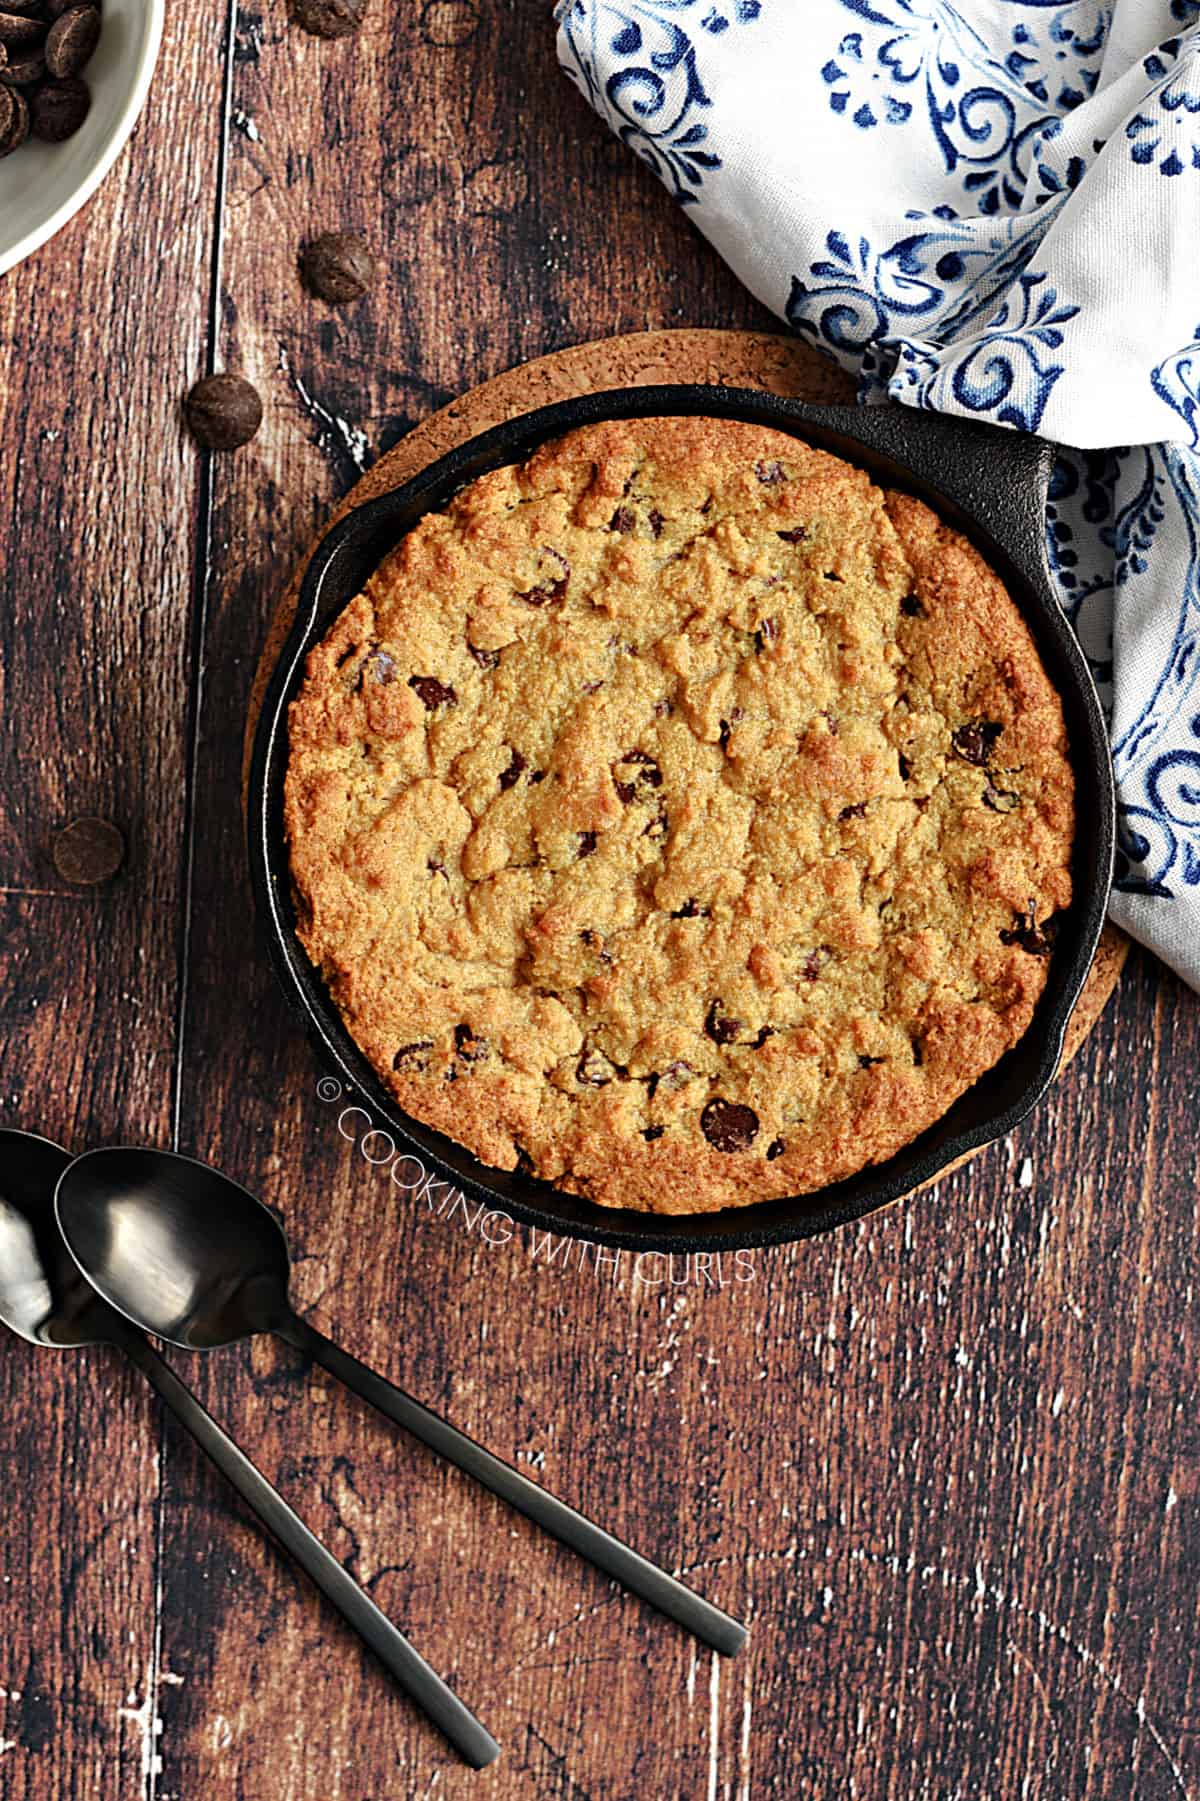 Looking down over a mini skillet chocolate chip cookie with two black spoons and scattered chocolate chips.